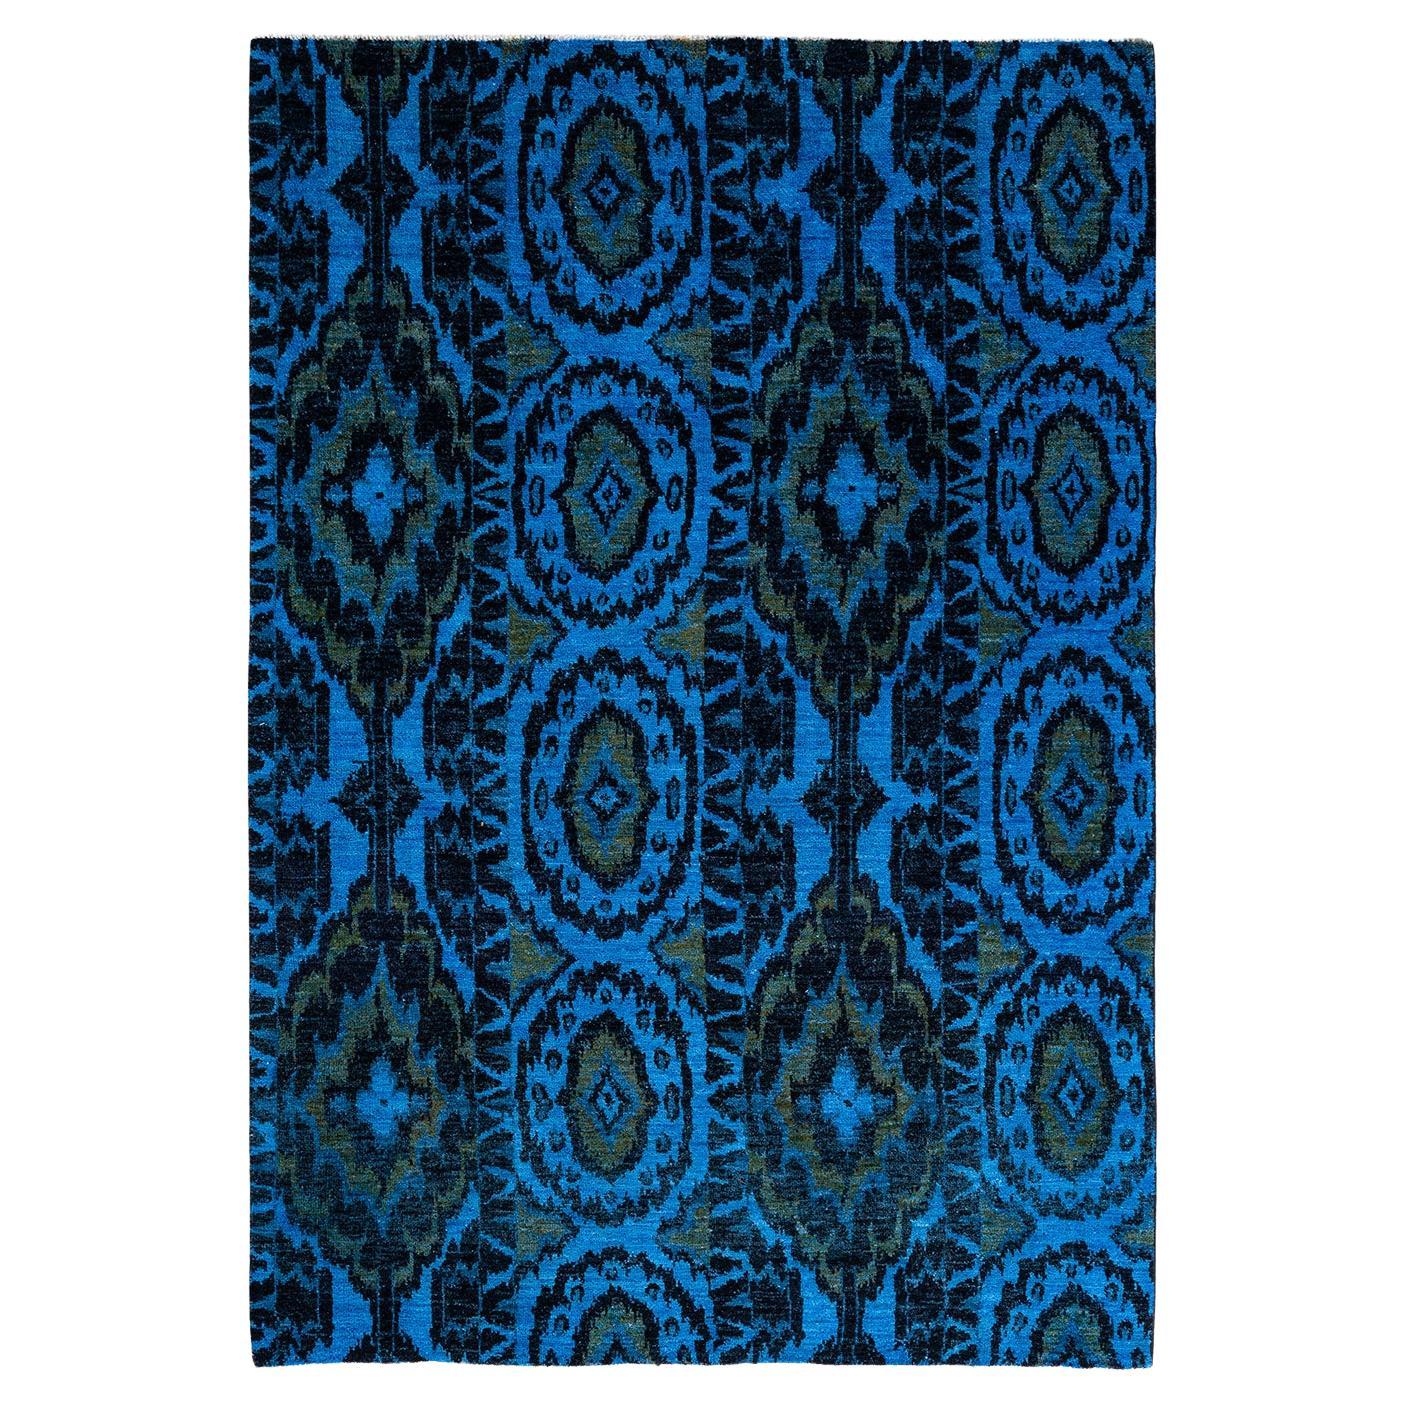 One of a Kind Hand Knotted Contemporary Overdyed Black Area Rug